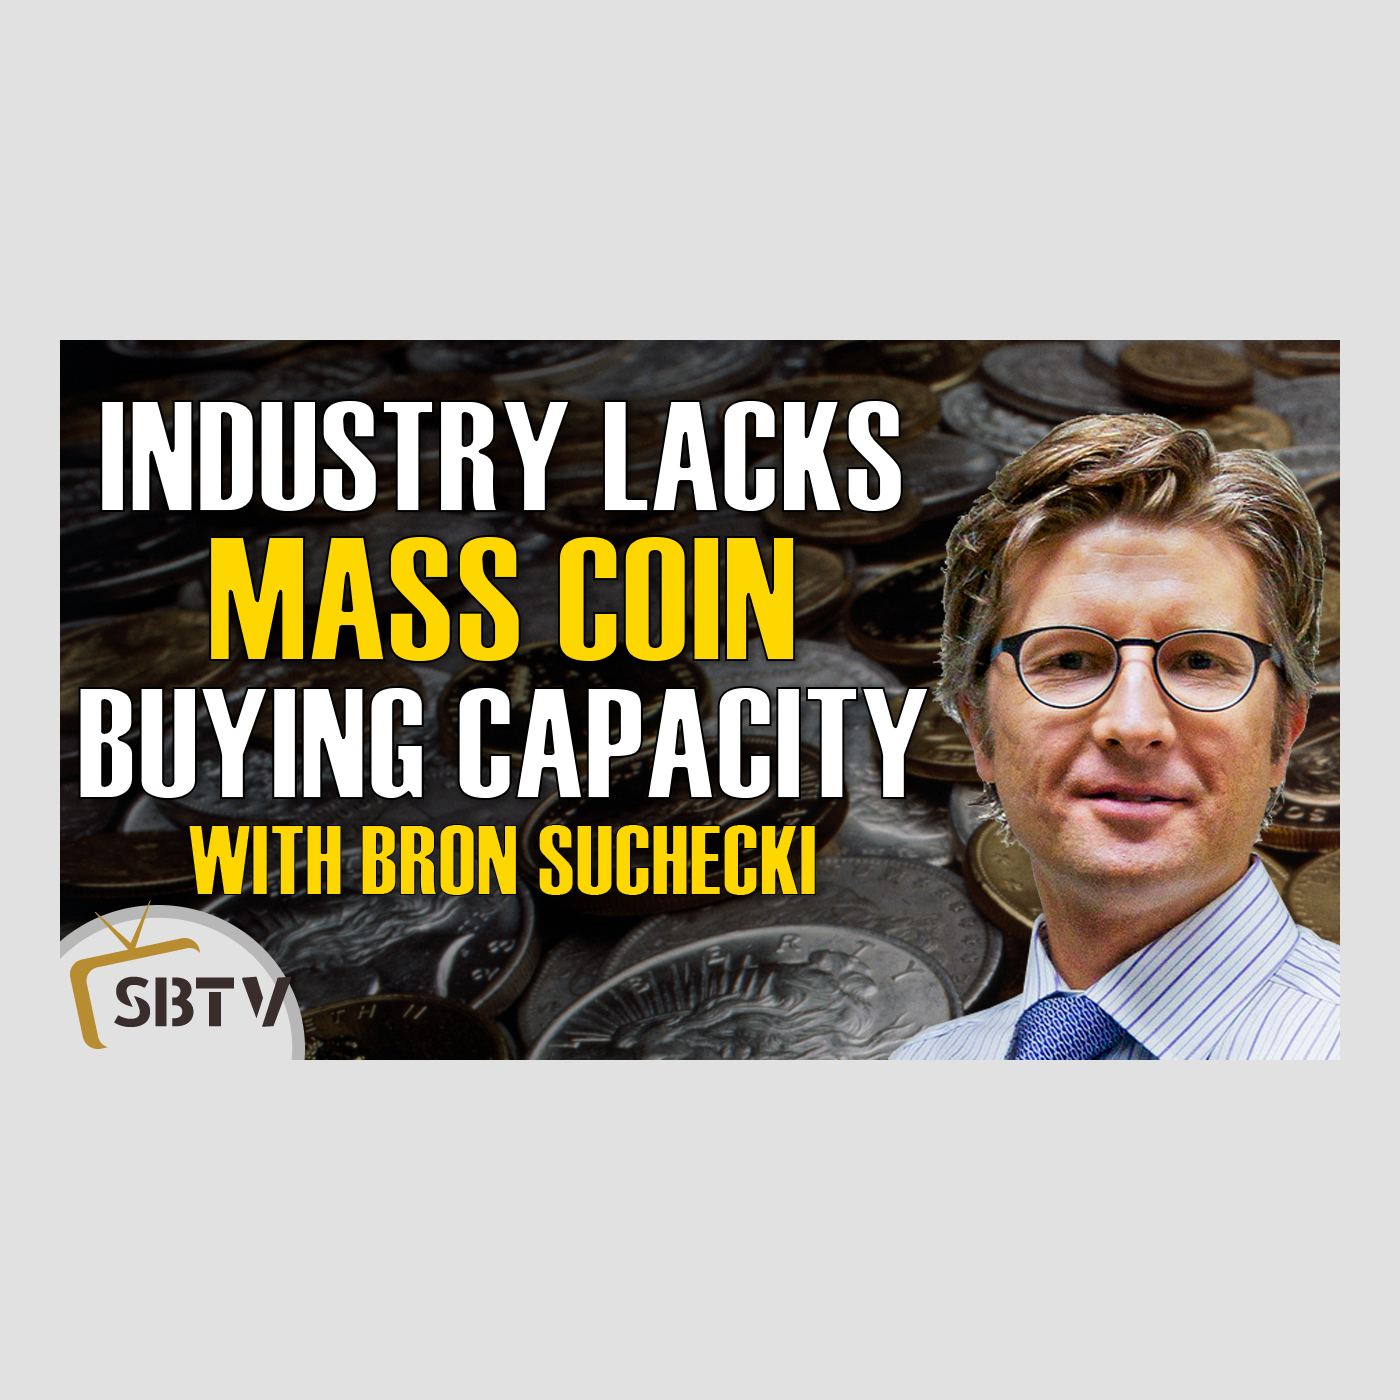 124 Bron Suchecki - Gold and Silver Industry Simply Lacks Capacity to Handle Mass Market Coin Buying